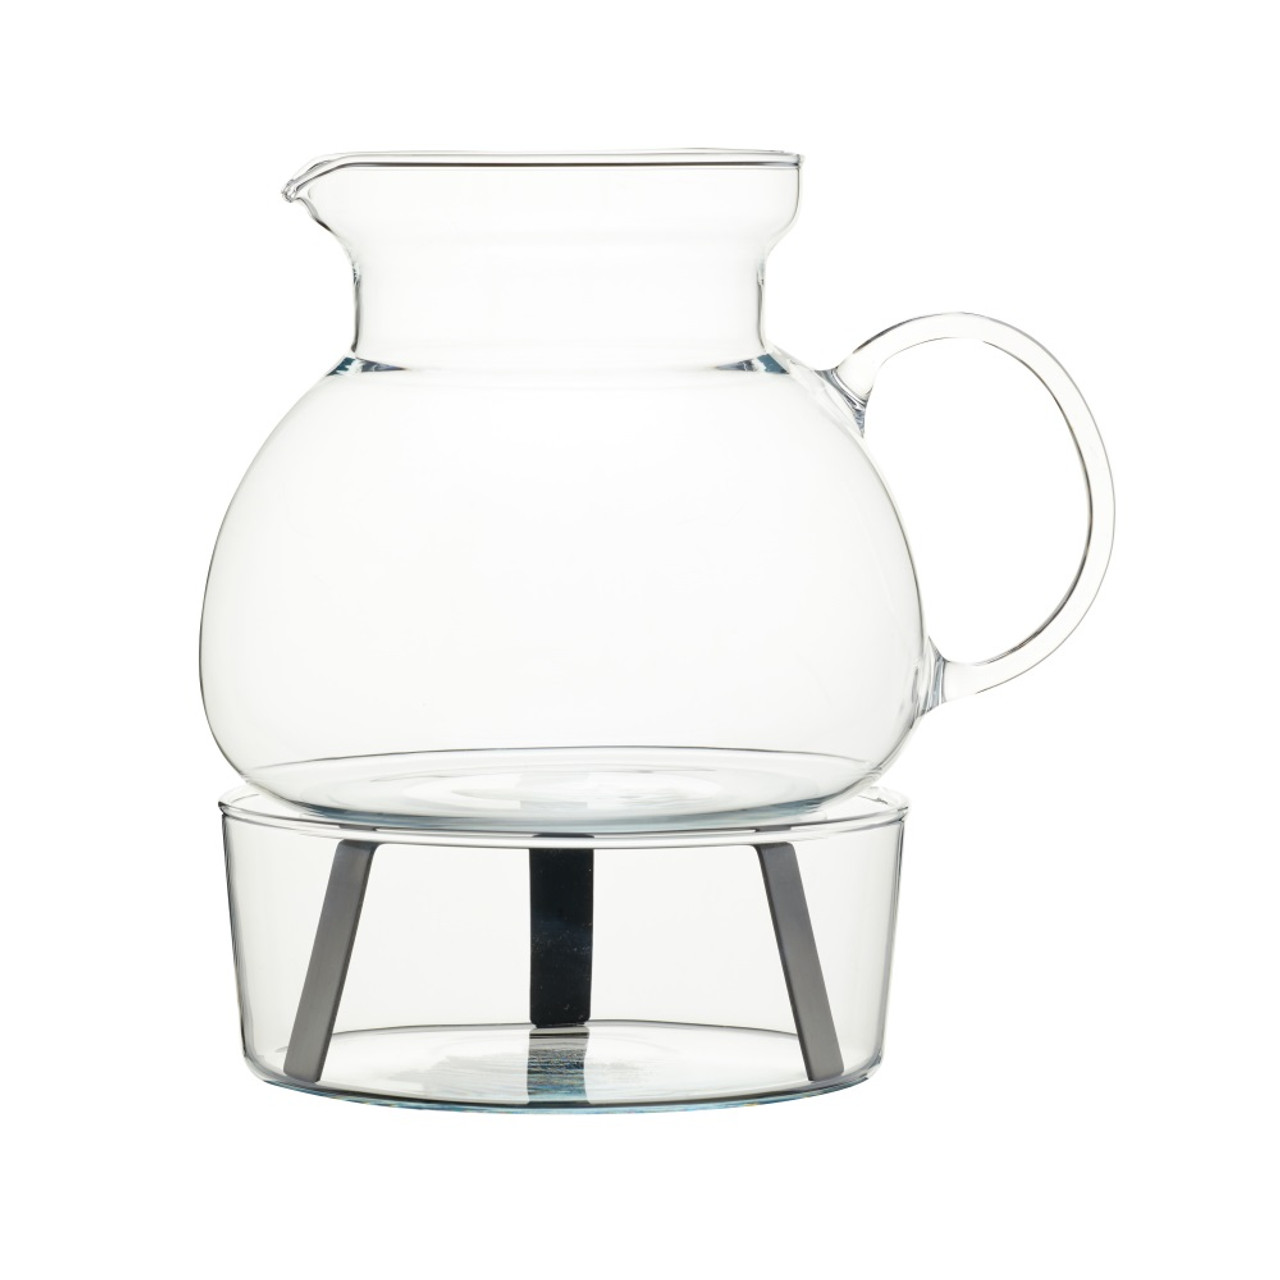 Wrenbury Mulled Wine Warmer 51 oz, Great for Mulled Punch, Mulled Cider, Heat Resistant Borosilicate Glass Jug Pitcher